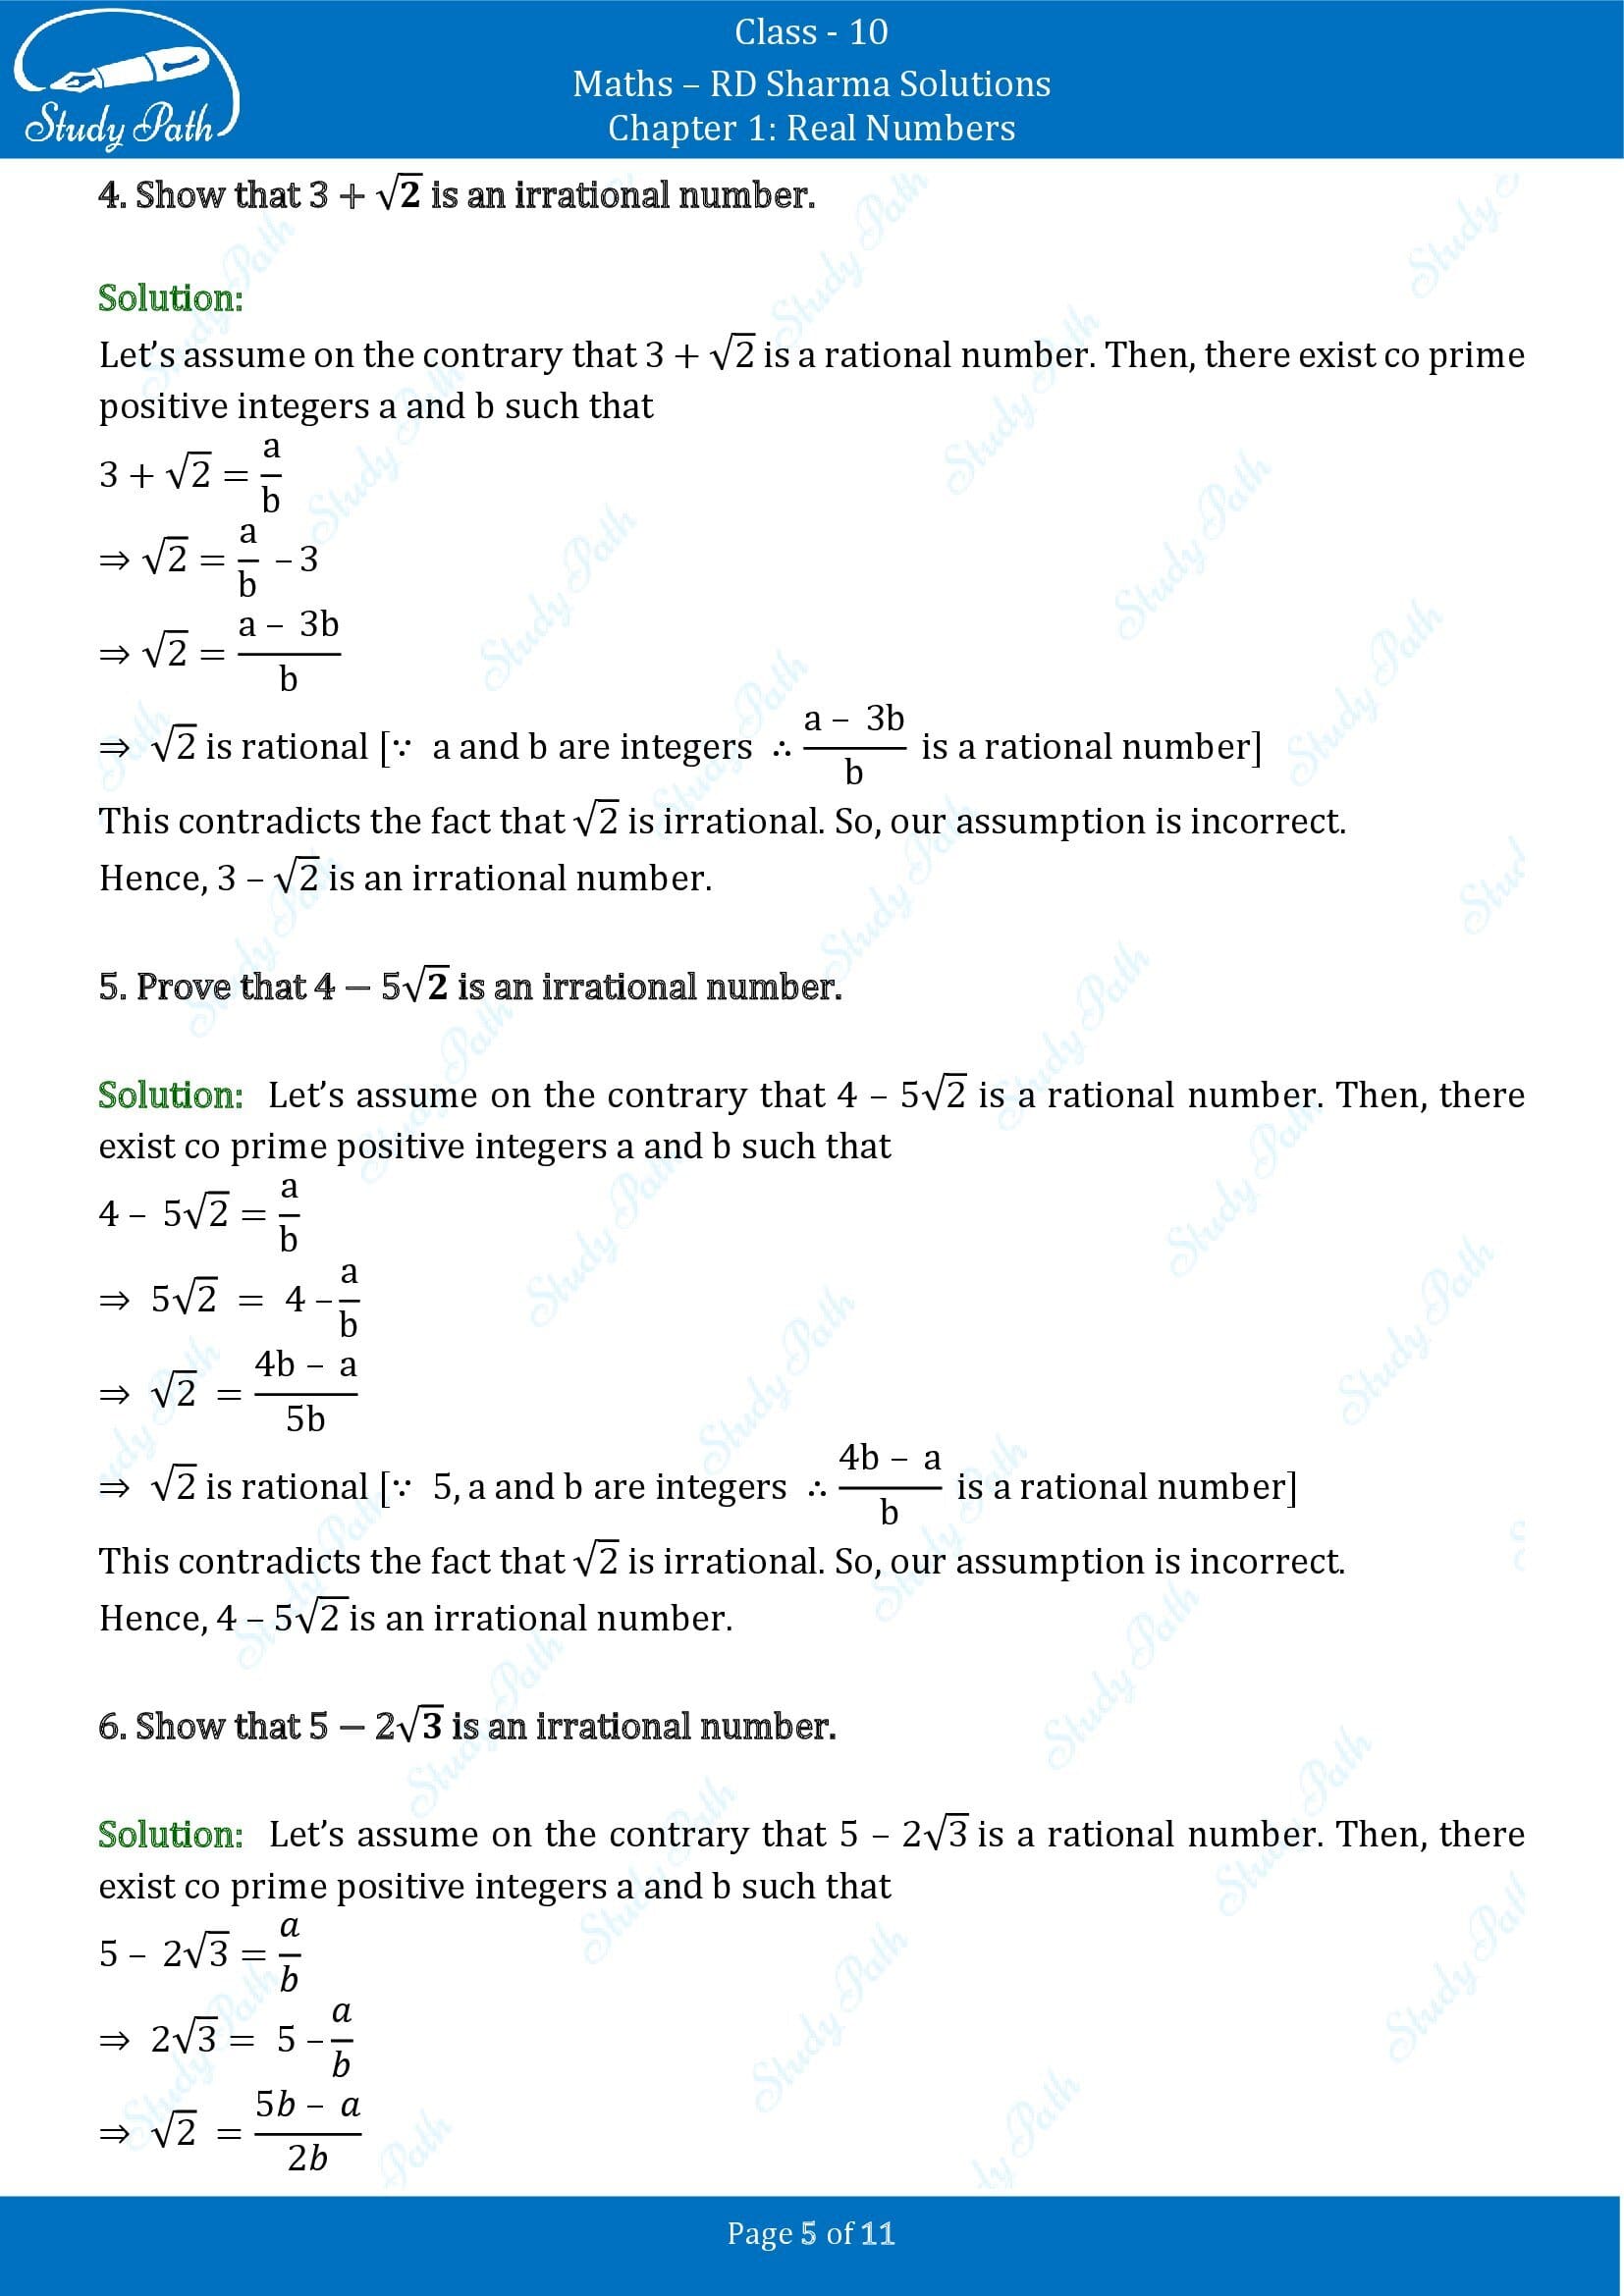 RD Sharma Solutions Class 10 Chapter 1 Real Numbers Exercise 1.5 00005